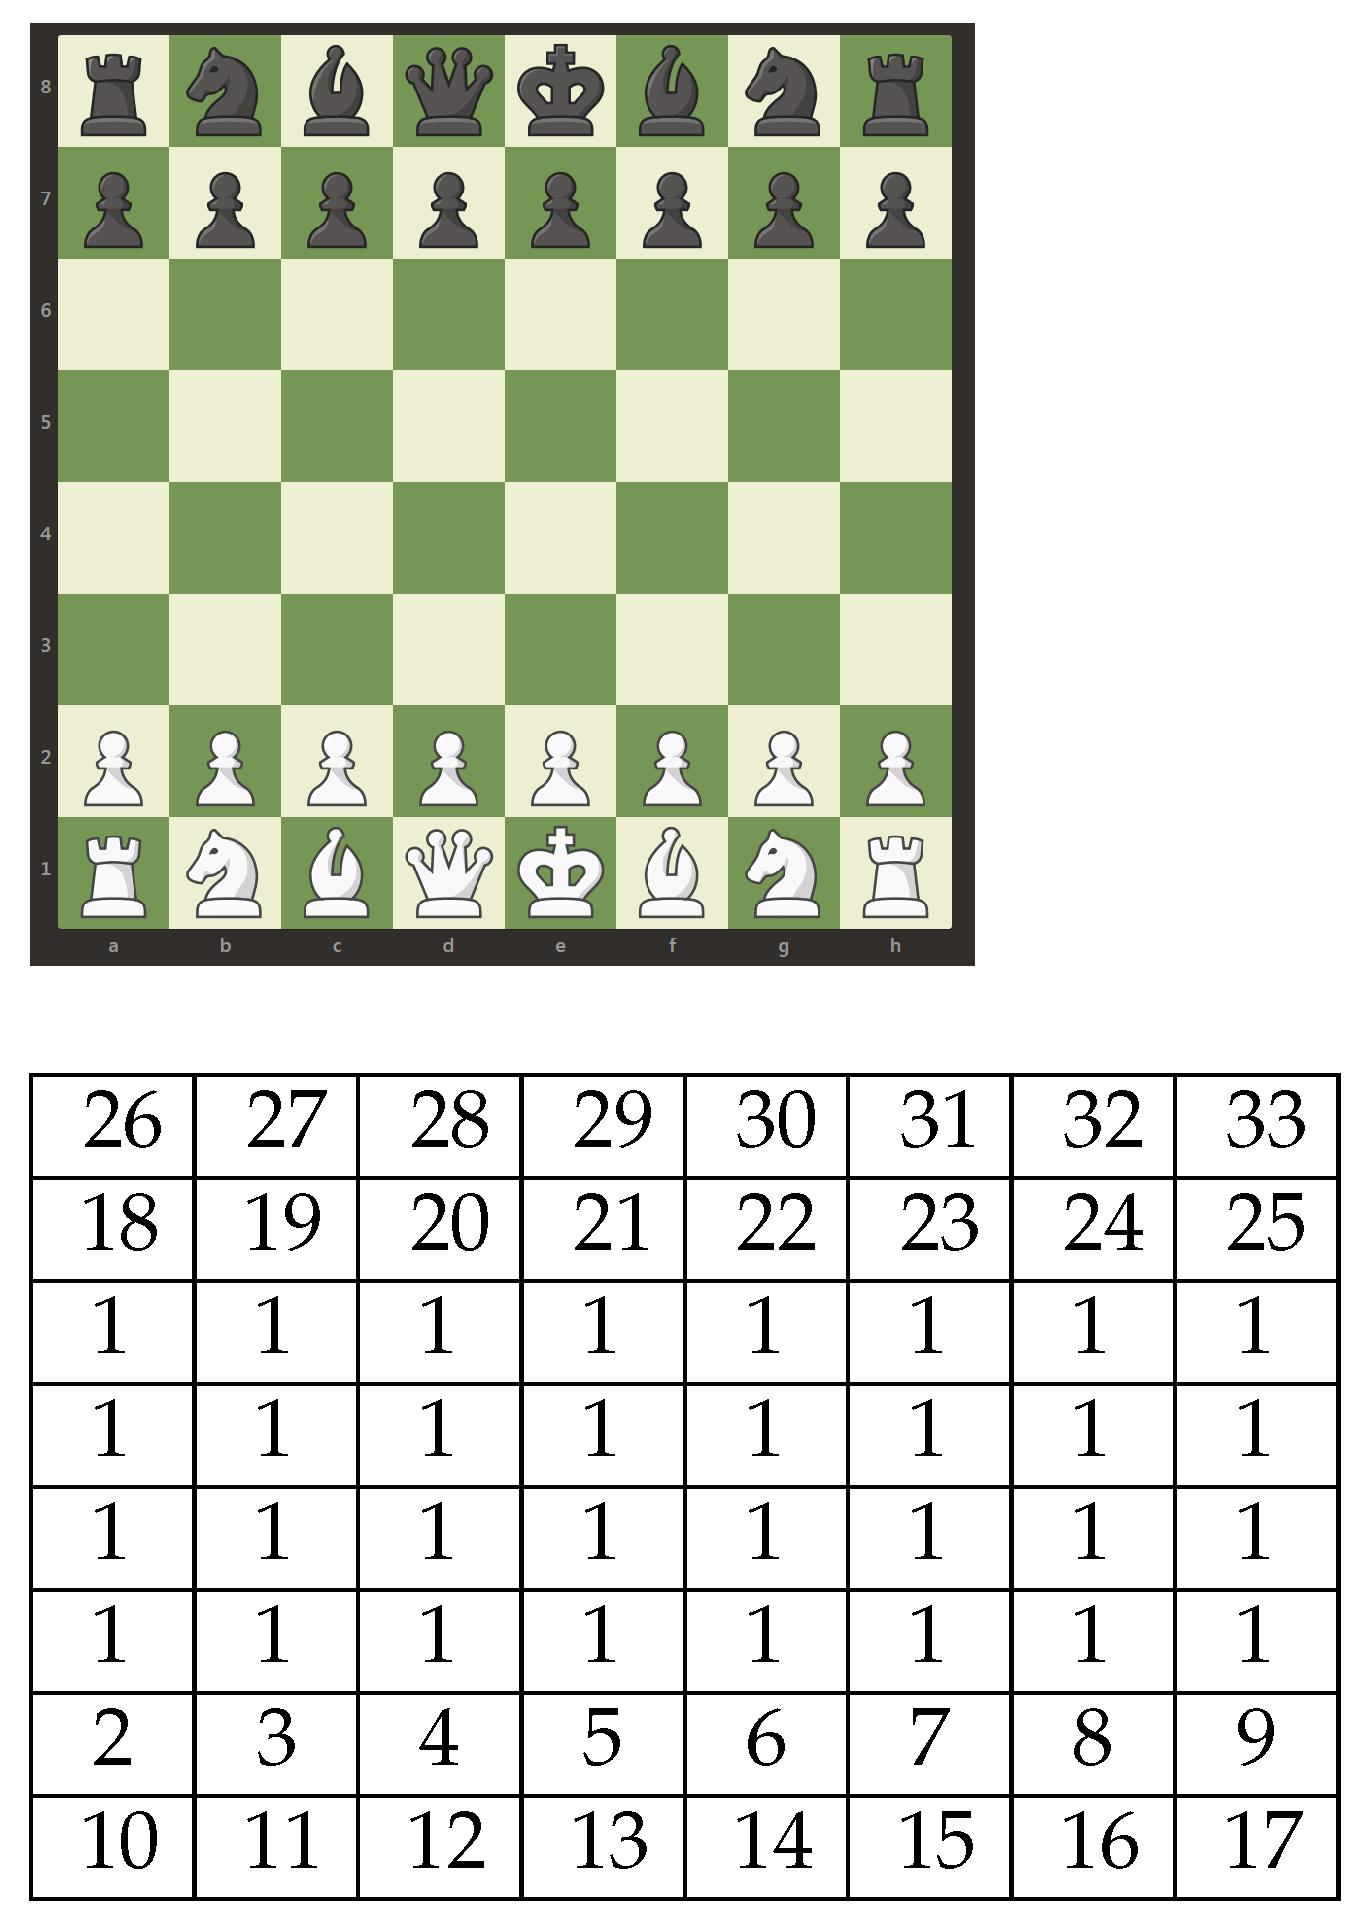 Mate in 15. Perfect chess puzzle : r/chess